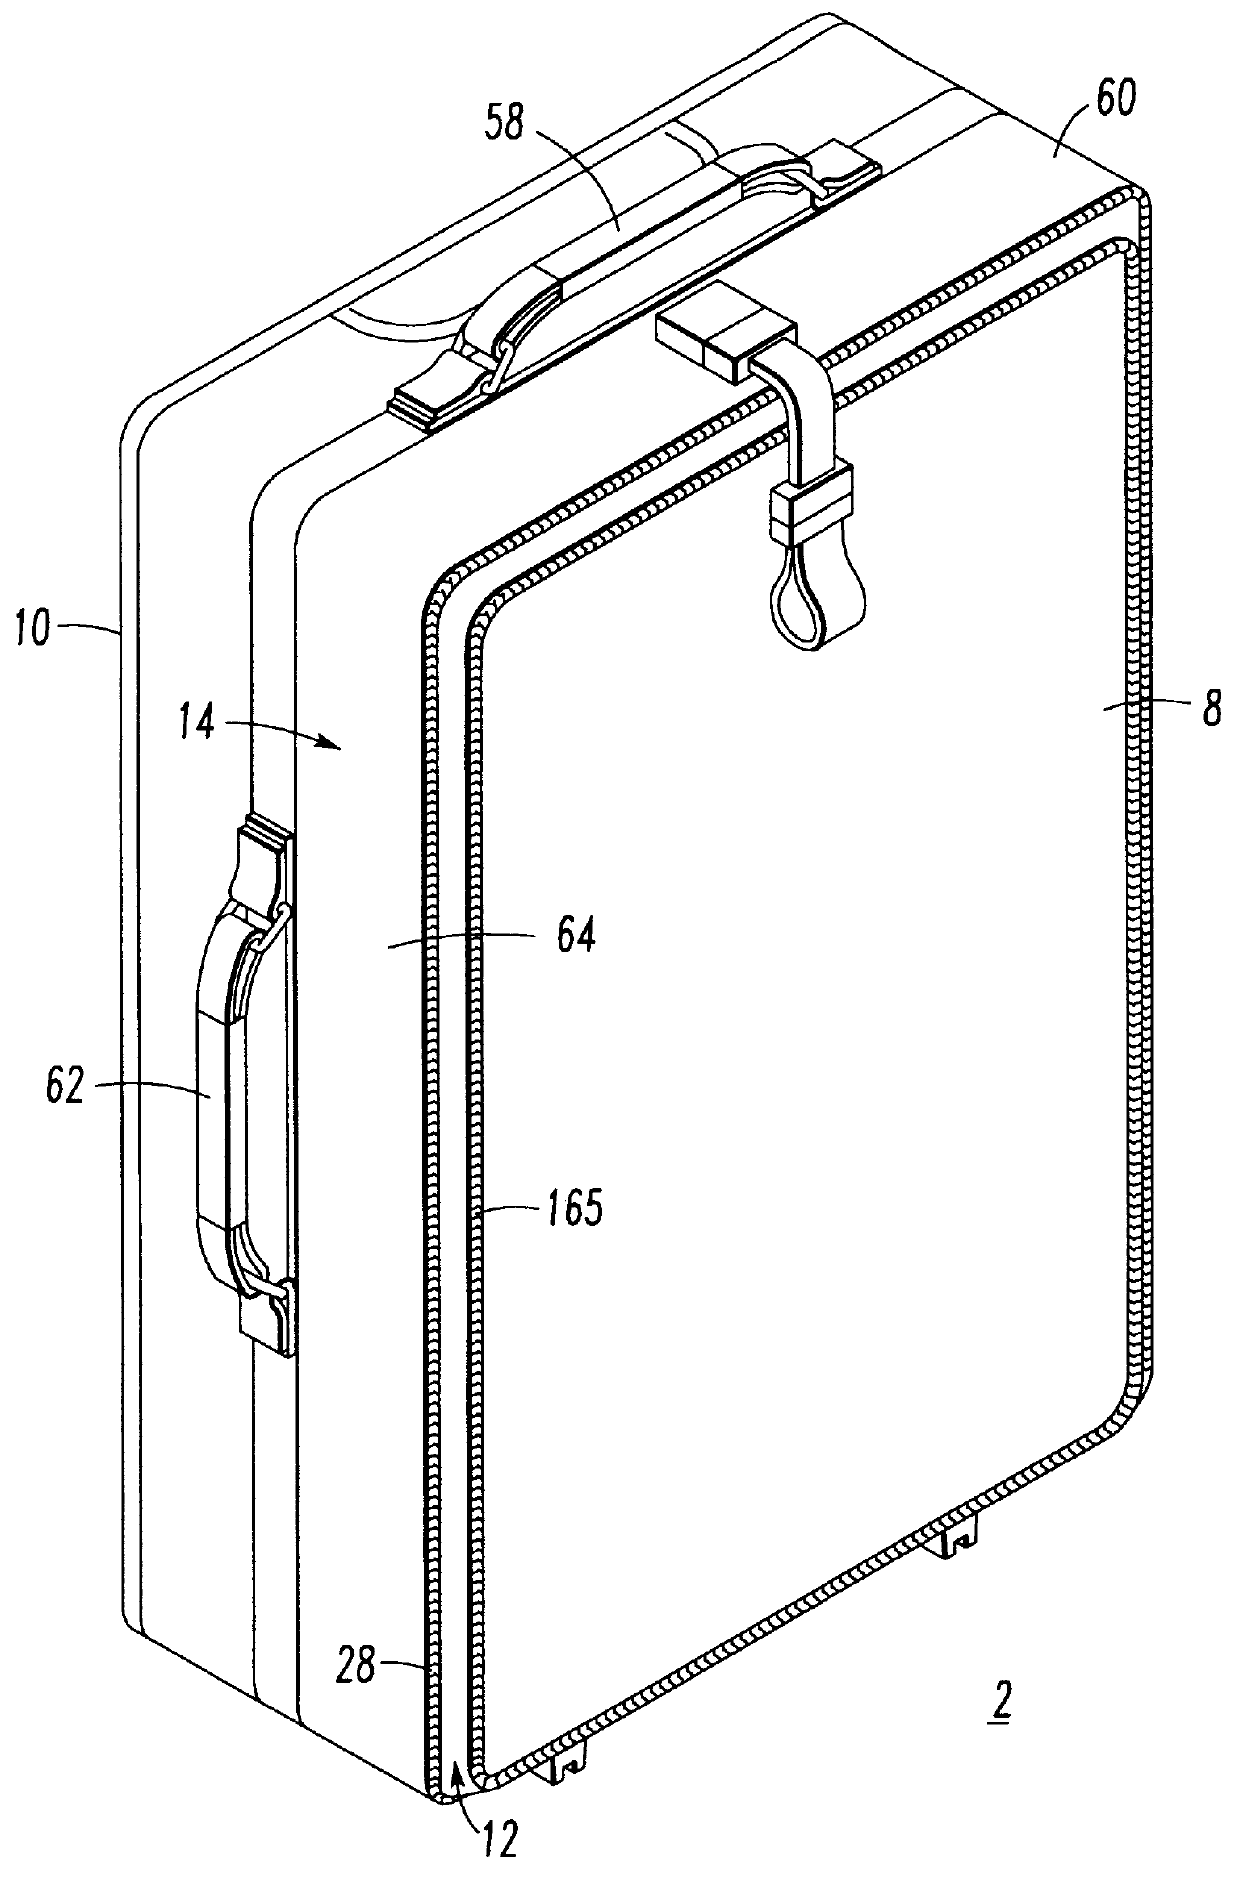 Article of luggage having divider for opposing sections